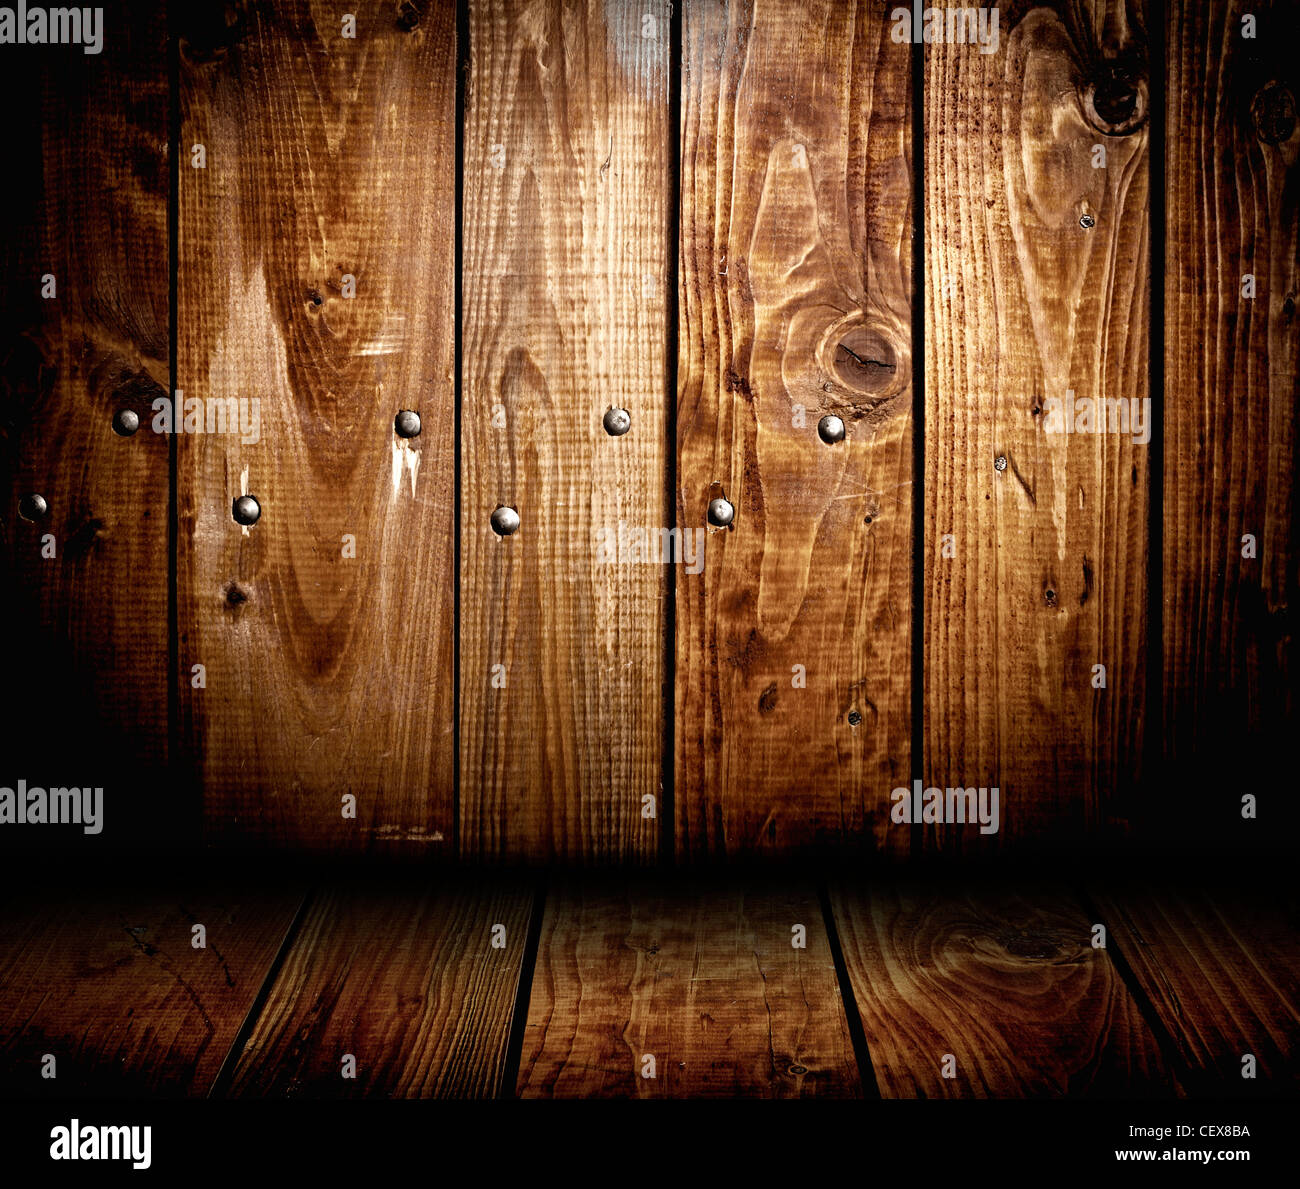 interior of wooden house. wood panel background texture Stock Photo